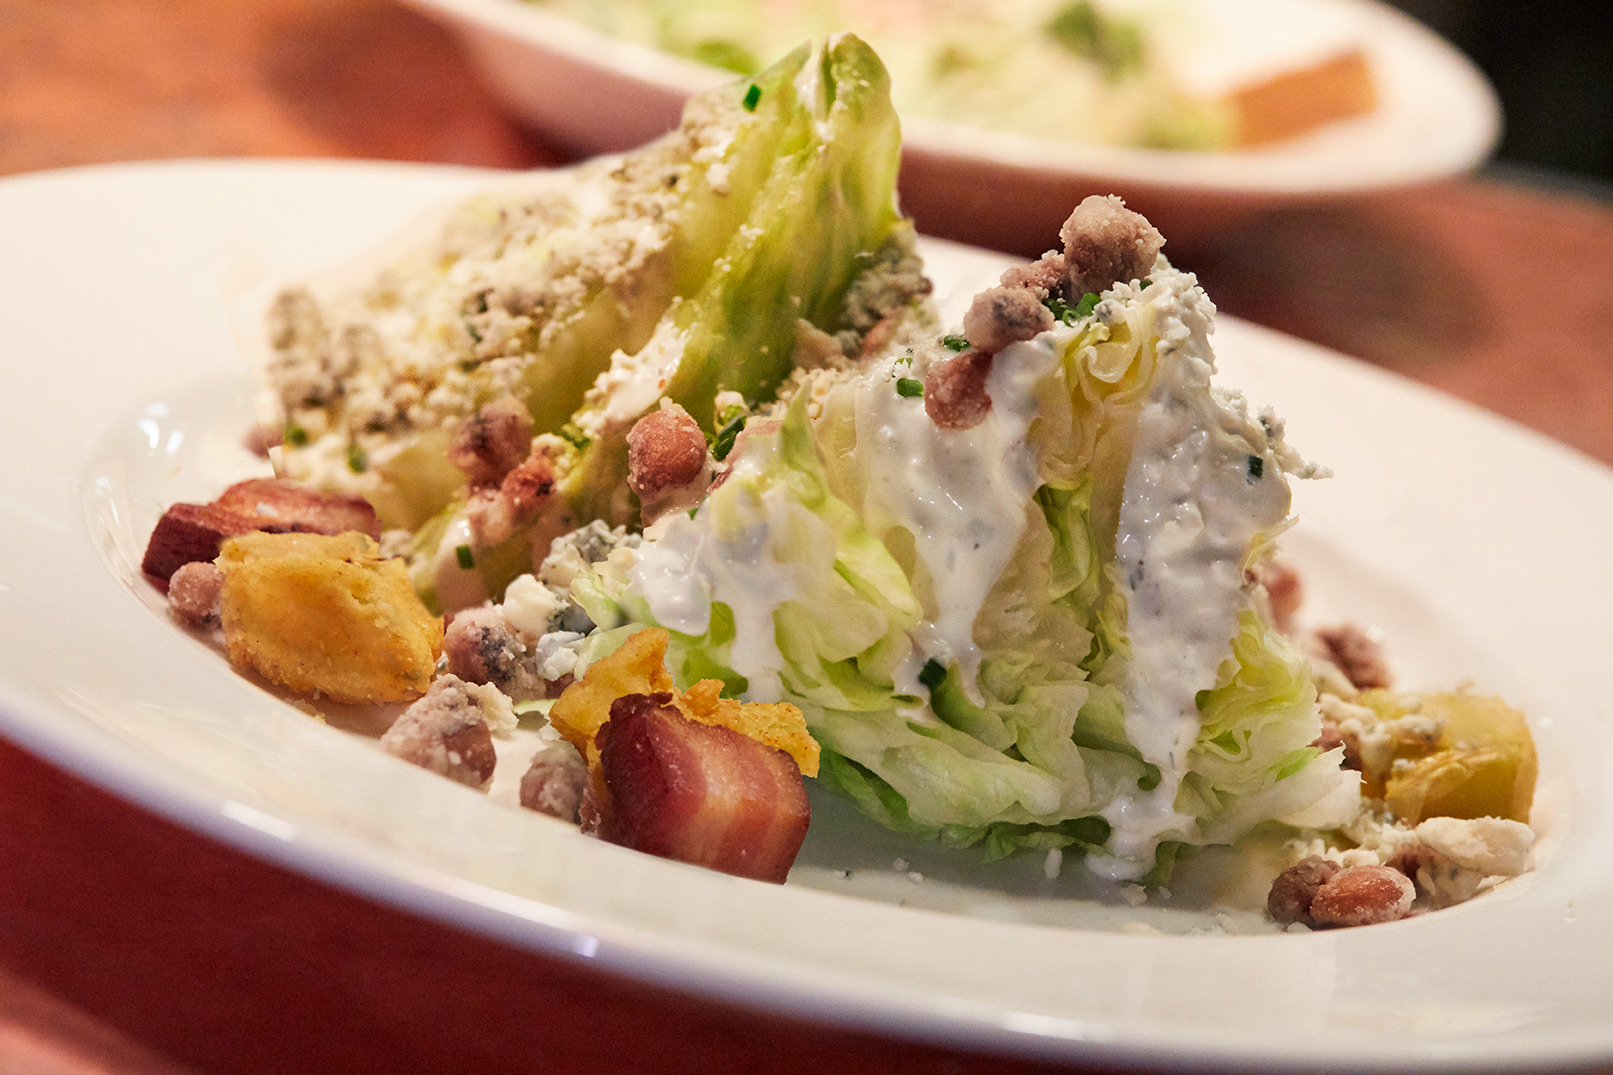 Southern Wedge Salad with fried green tomatoes, crispy fried black eyed peas, bacon lardons and bleu cheese dressing. The Southern Steak and Oyster Restaurant in Nashville